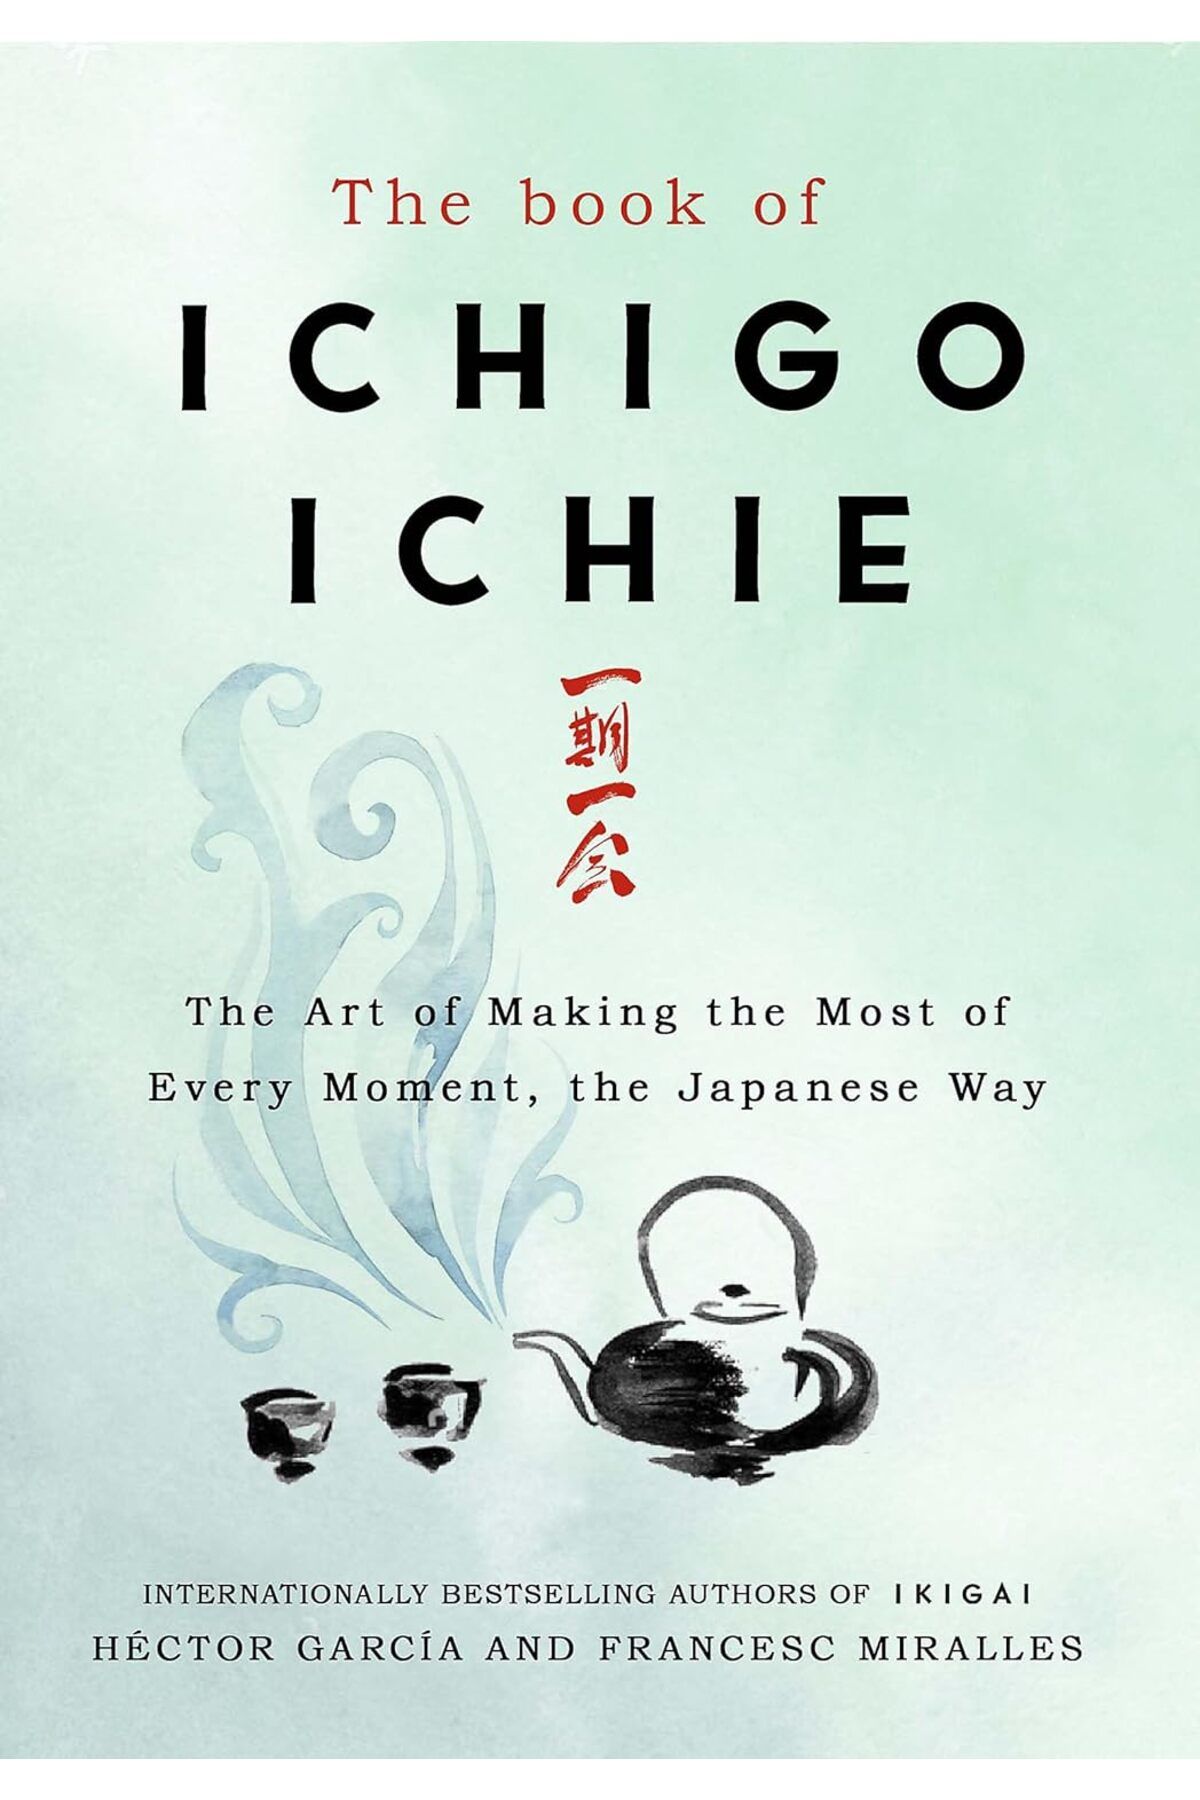 Quercus The Book of Ichigo Ichie: The Art of Making the Most of Every Moment, the Japanese Way